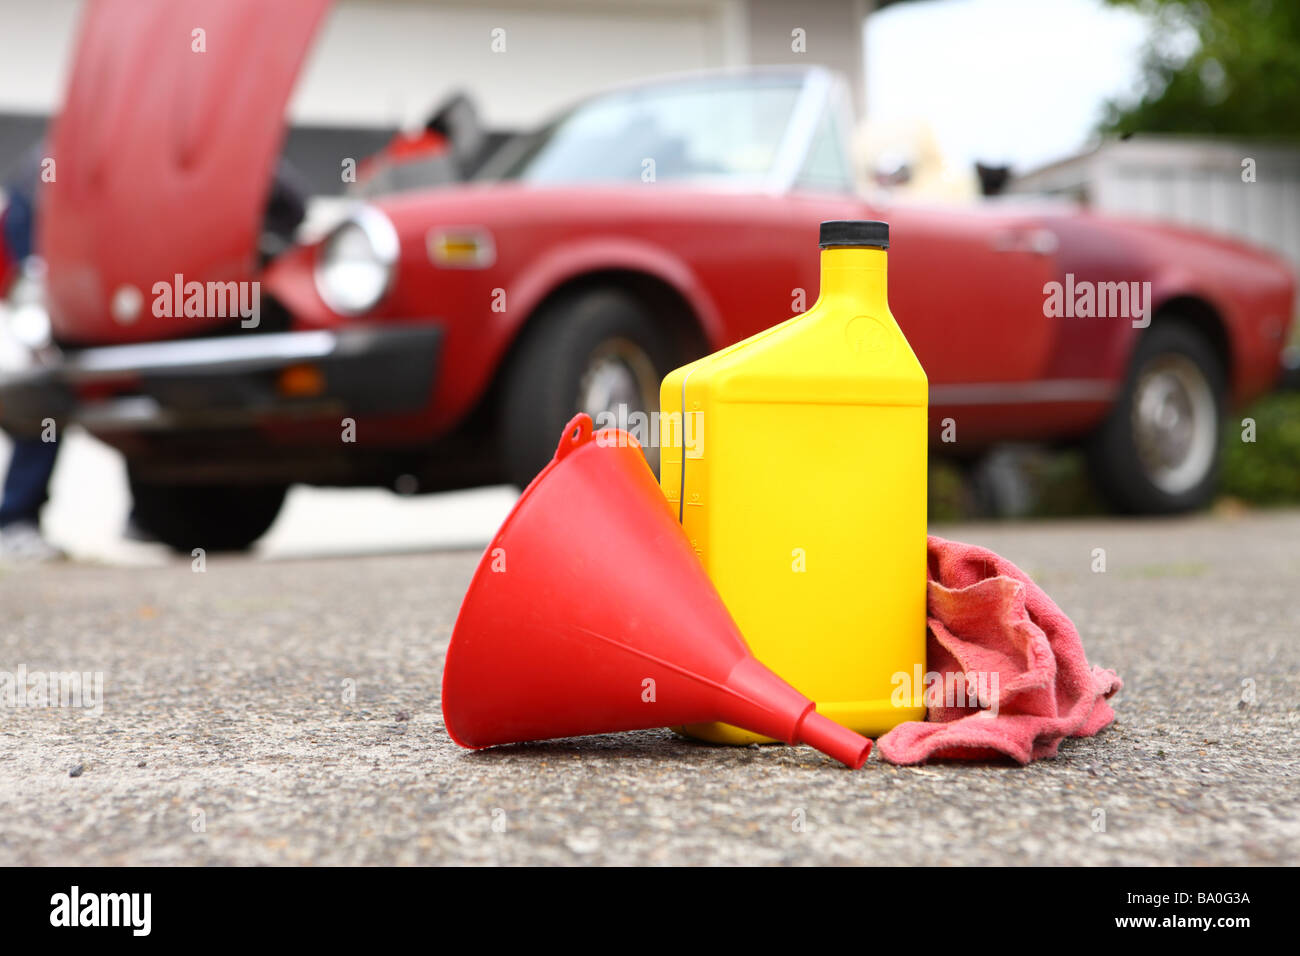 Oil bottle funnel and rag with classic car in background Stock Photo